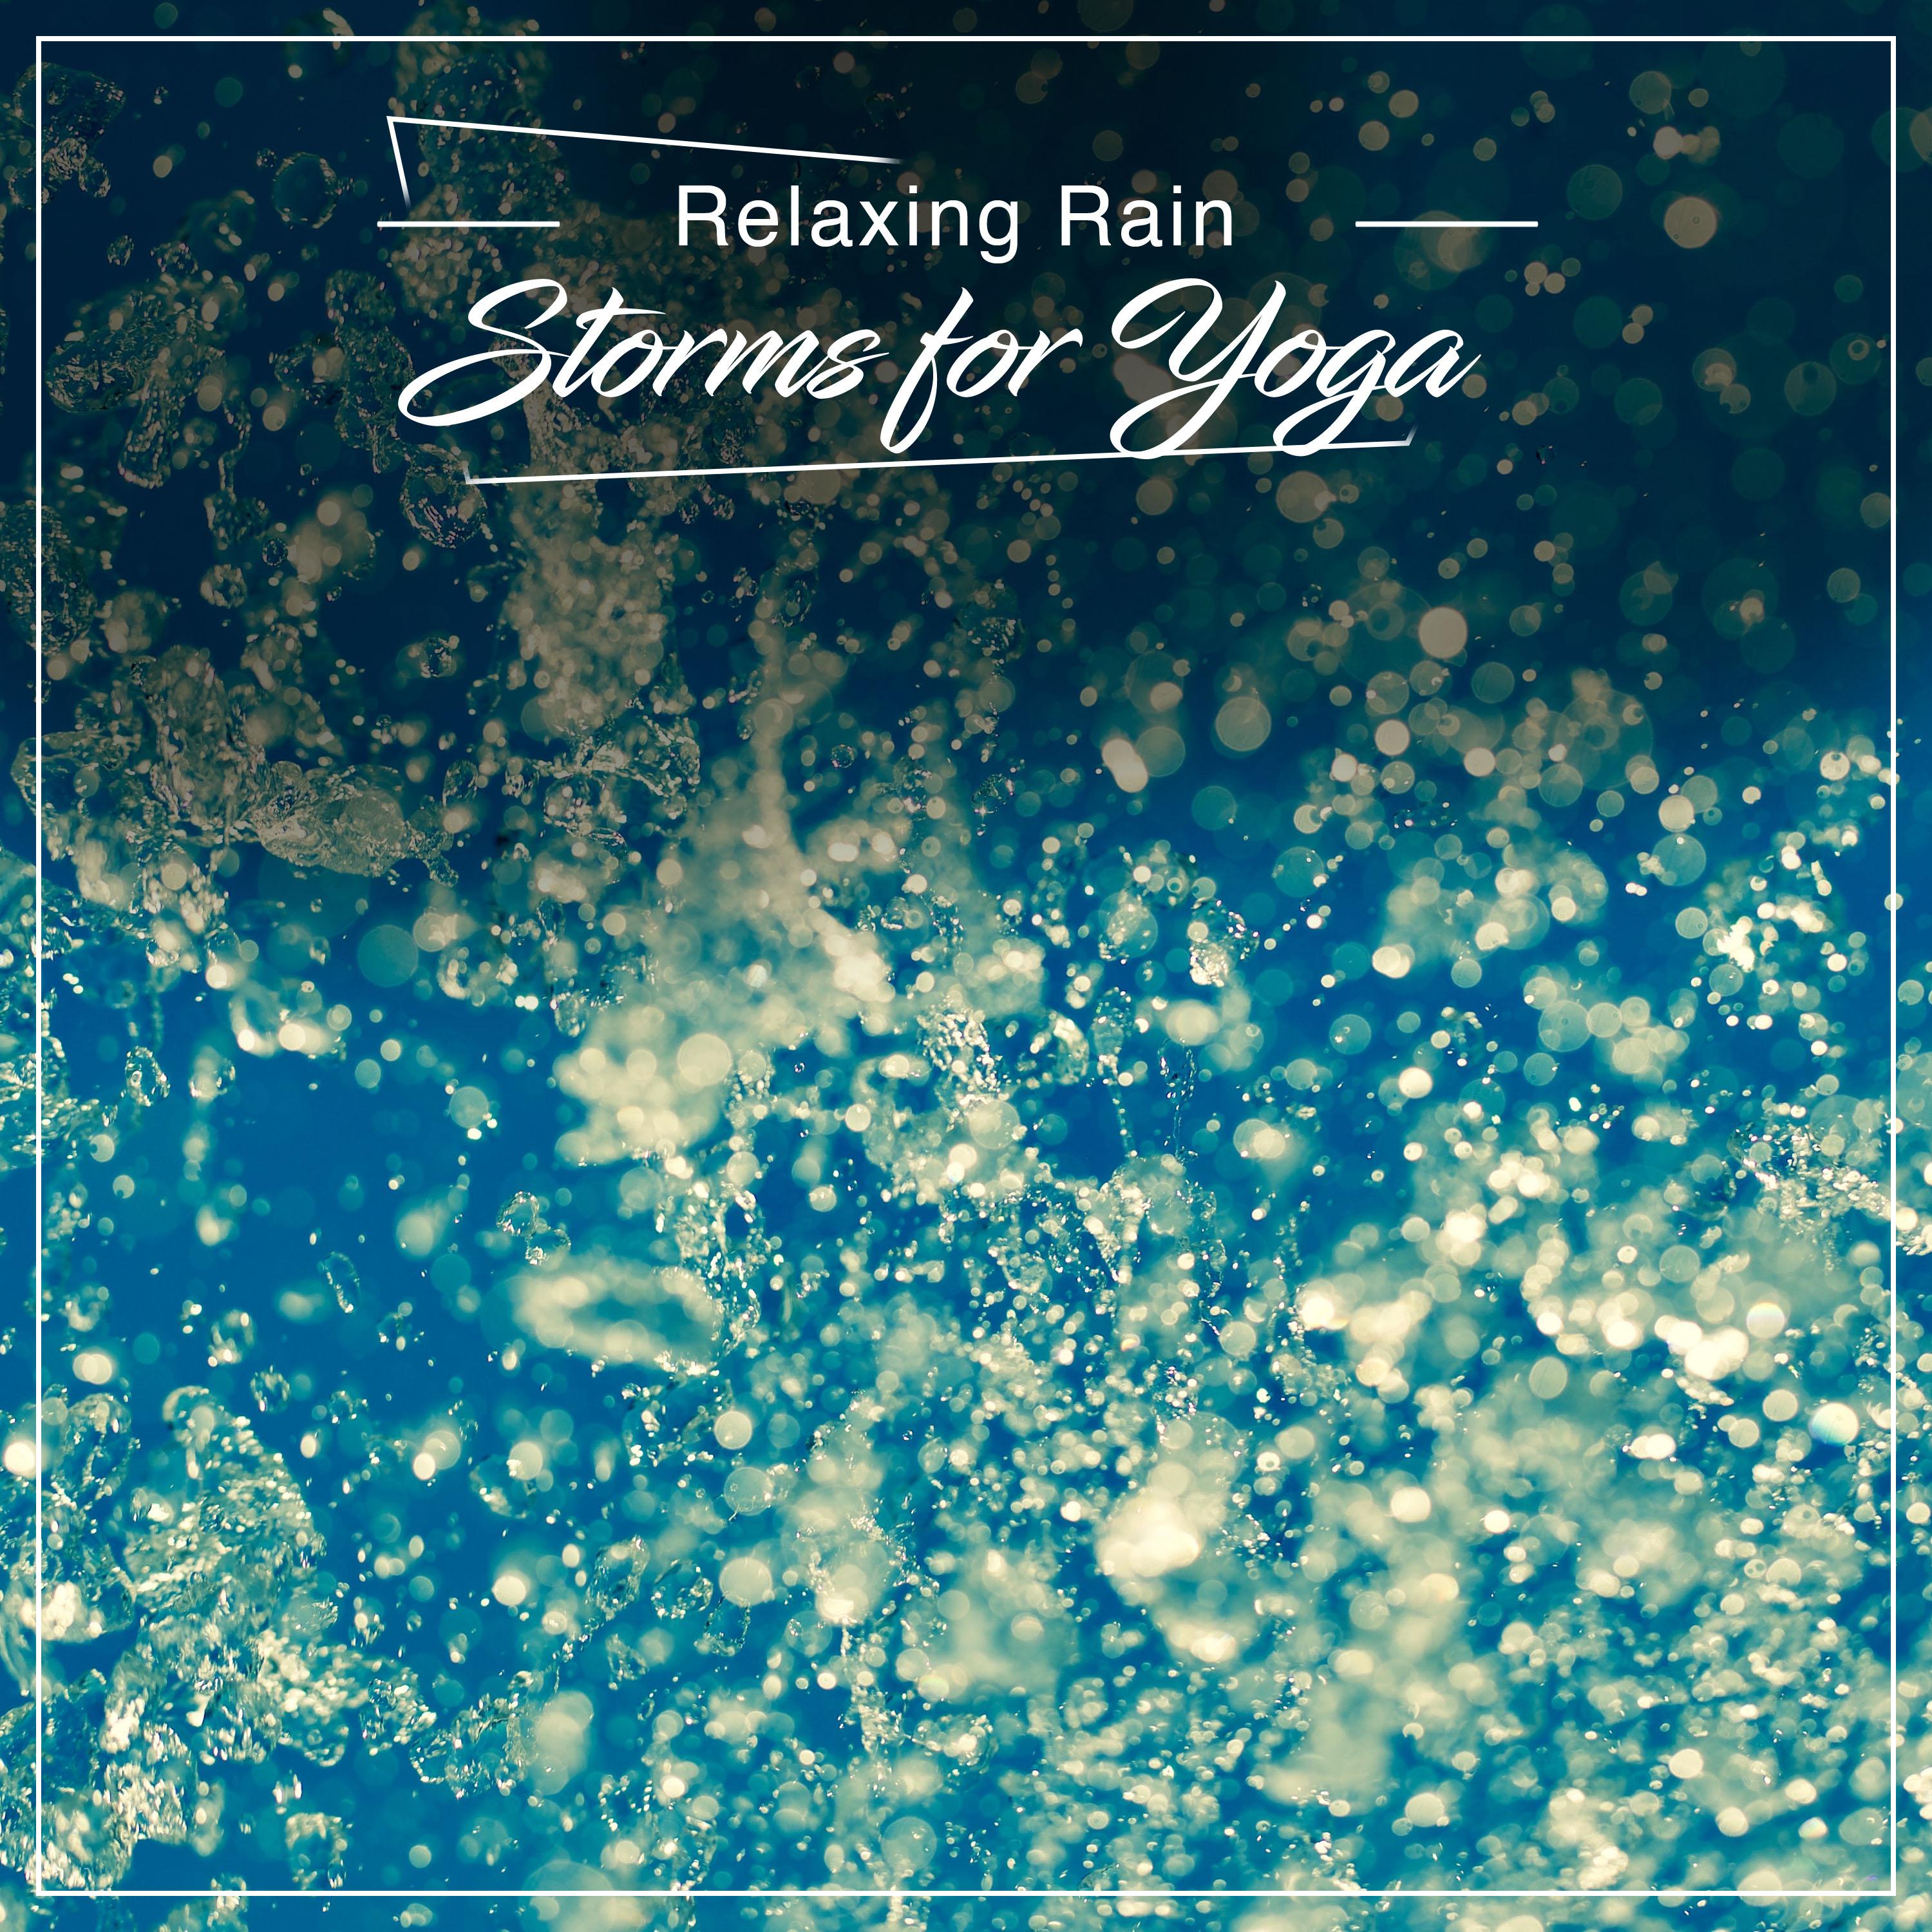 11 Relaxing Rain Storms for Practicing Yoga